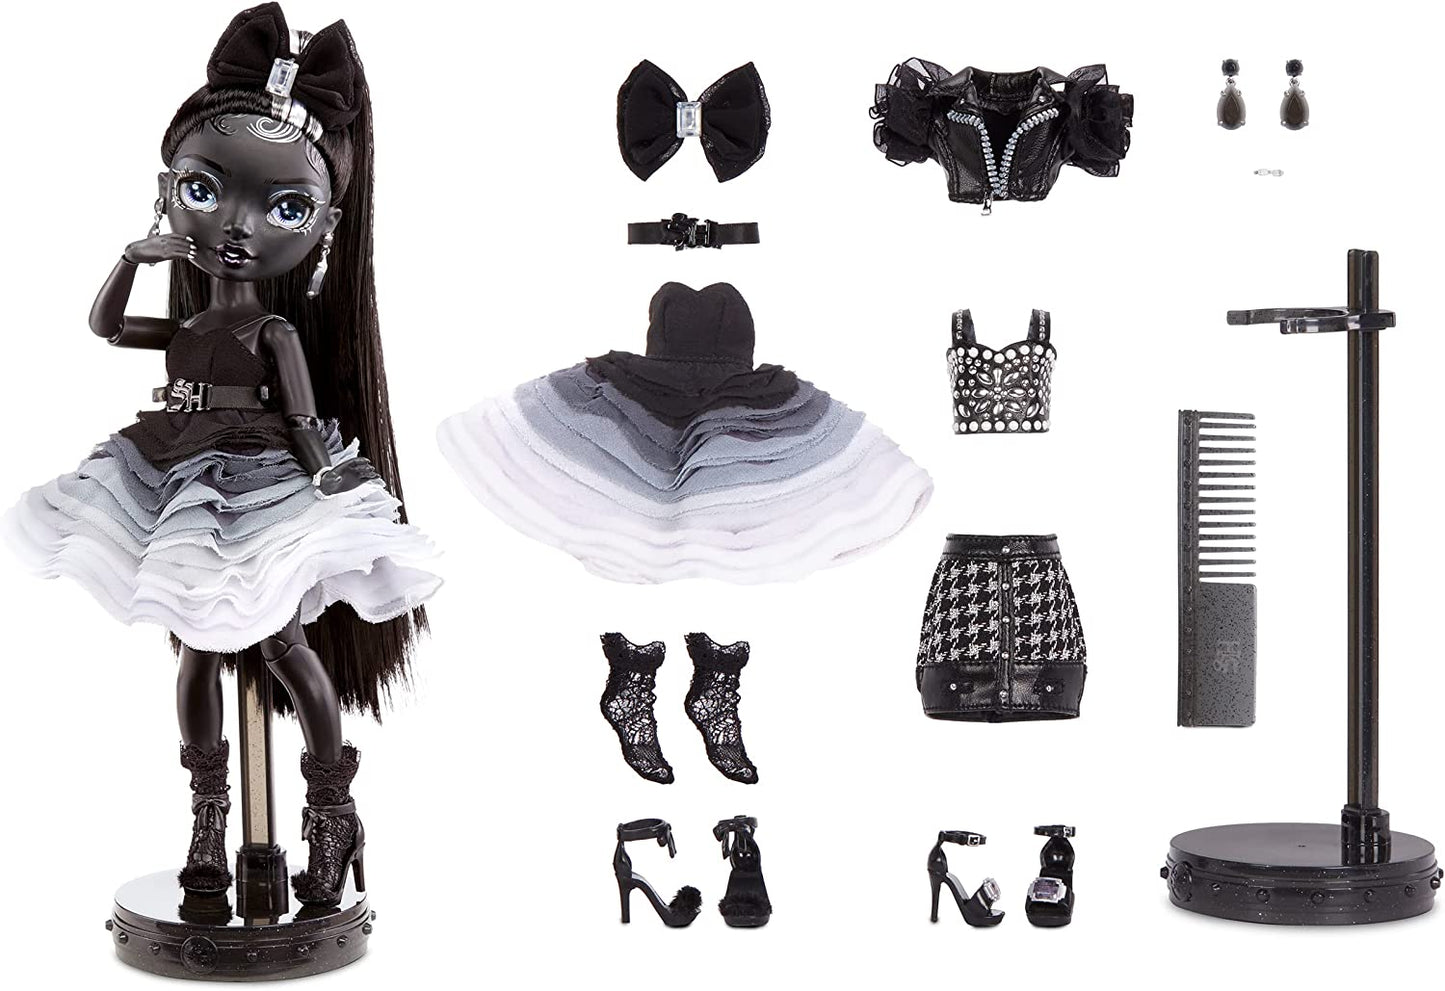 Rainbow High Shadow Series 1 Shanelle Onyx- Grayscale Fashion Doll. 2 Black Designer Outfits to Mix & Match with Accessories